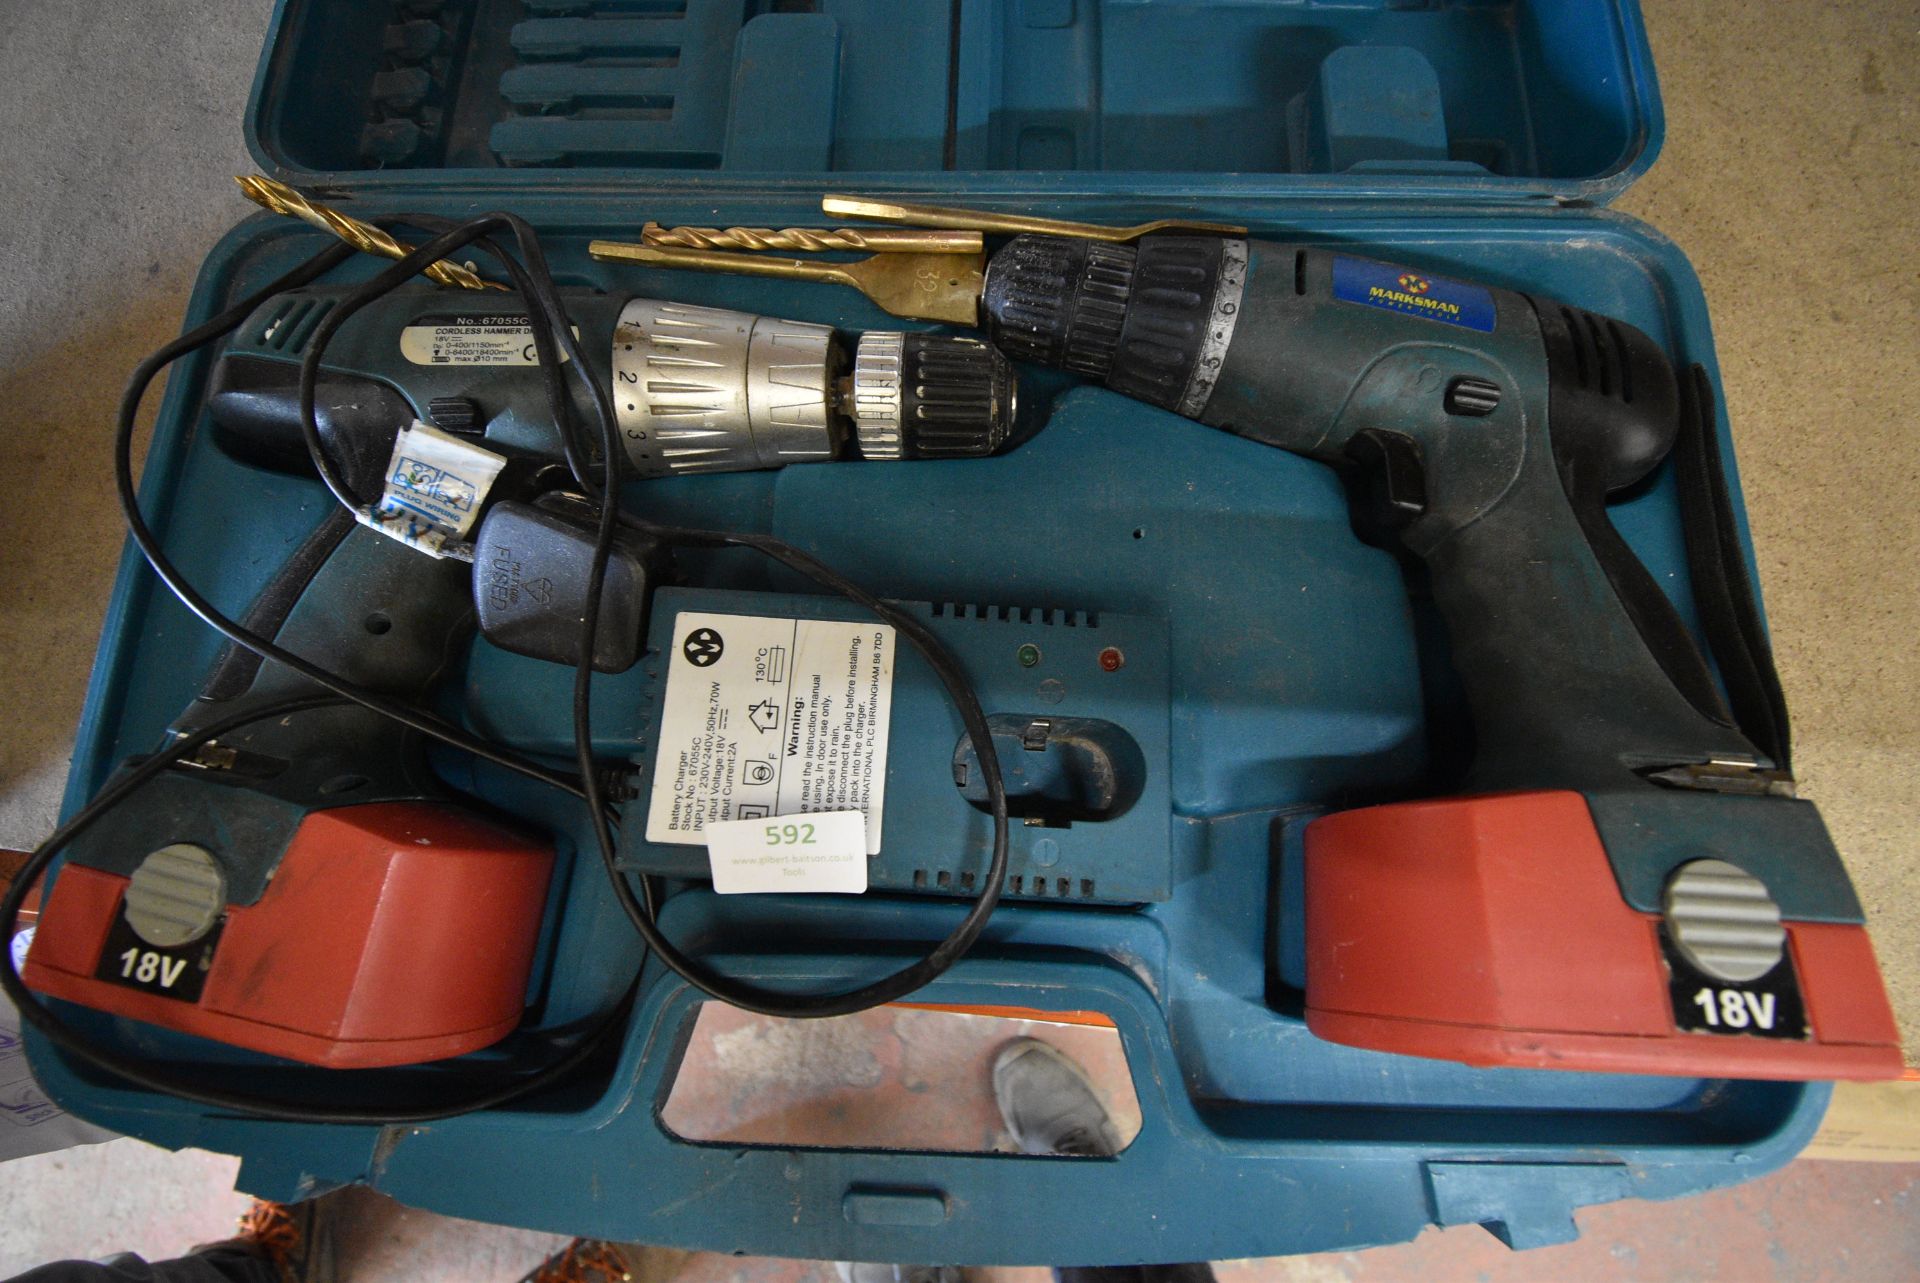 Case of Two 18v Battery Drills with Charger